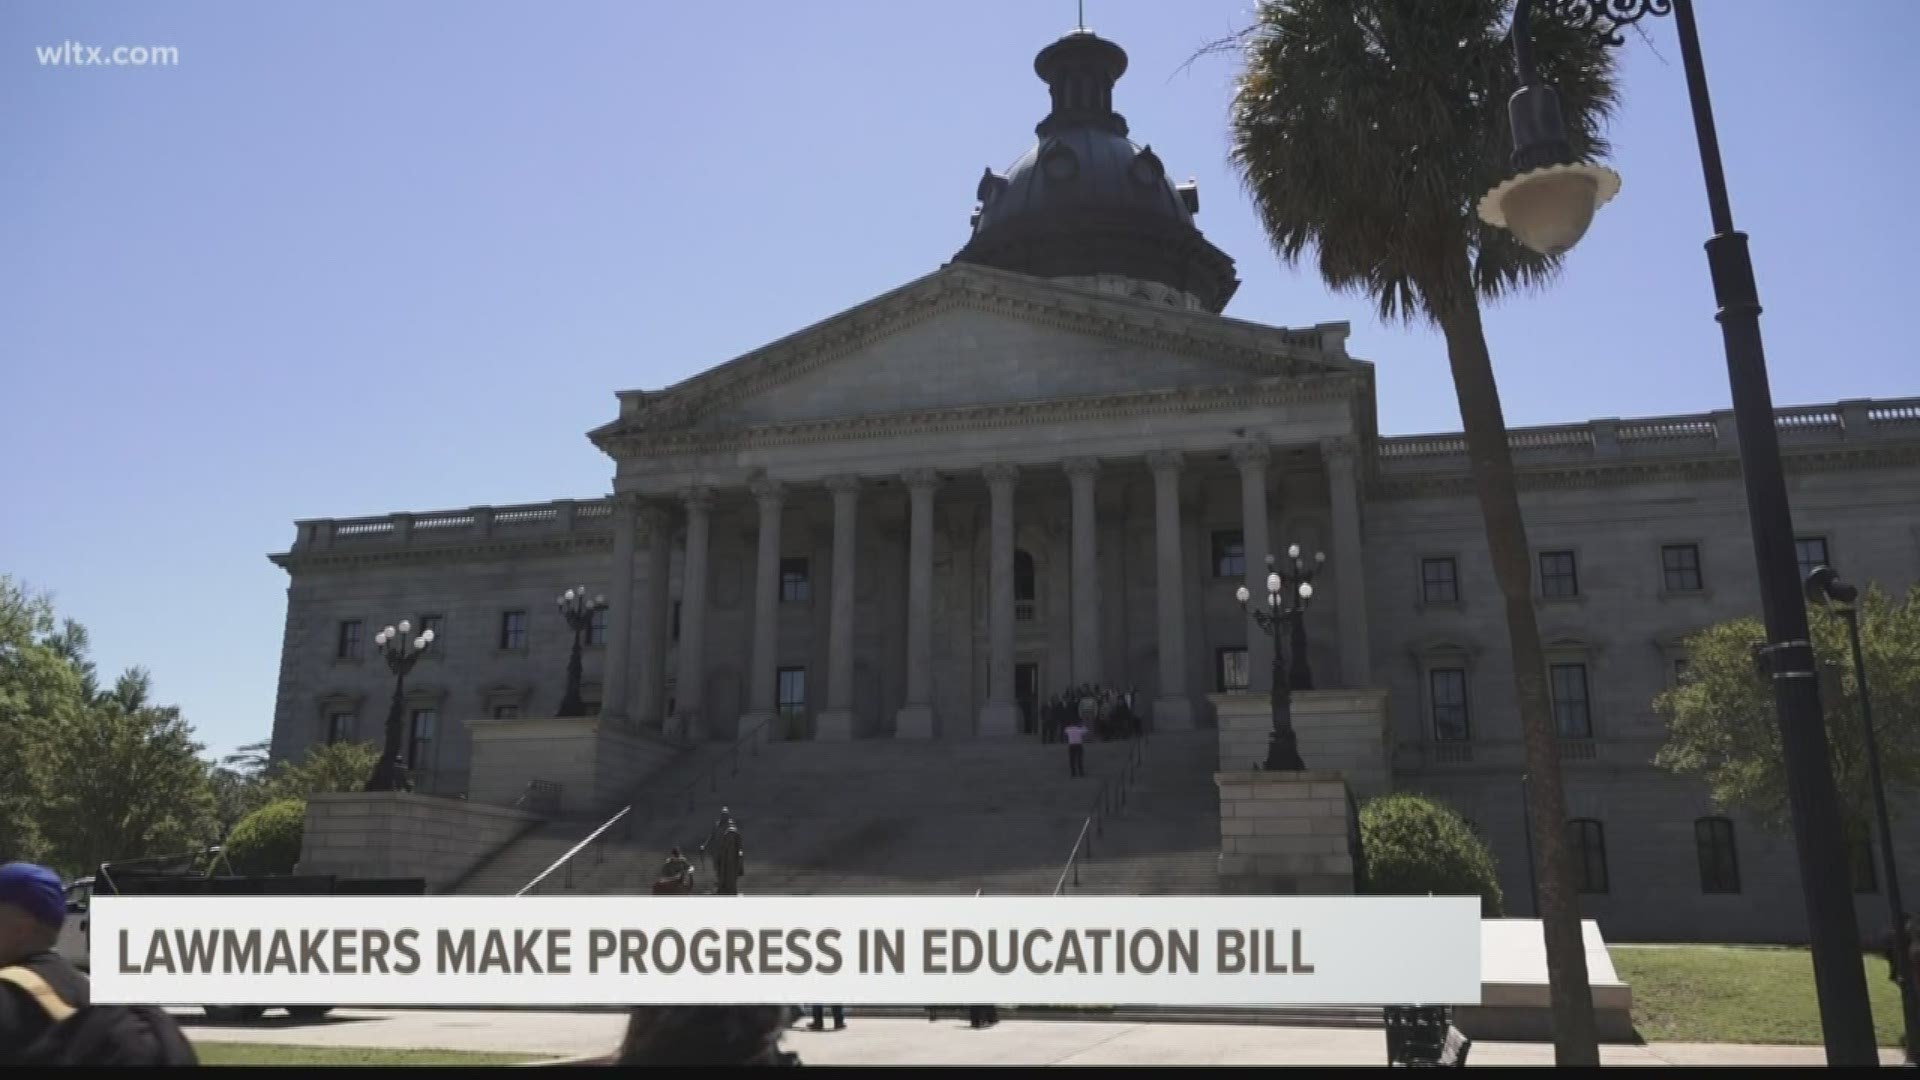 Lawmakers added changes to the education bill including school districts being able to set their own start dates and teachers receiving extra funds for classrooms.